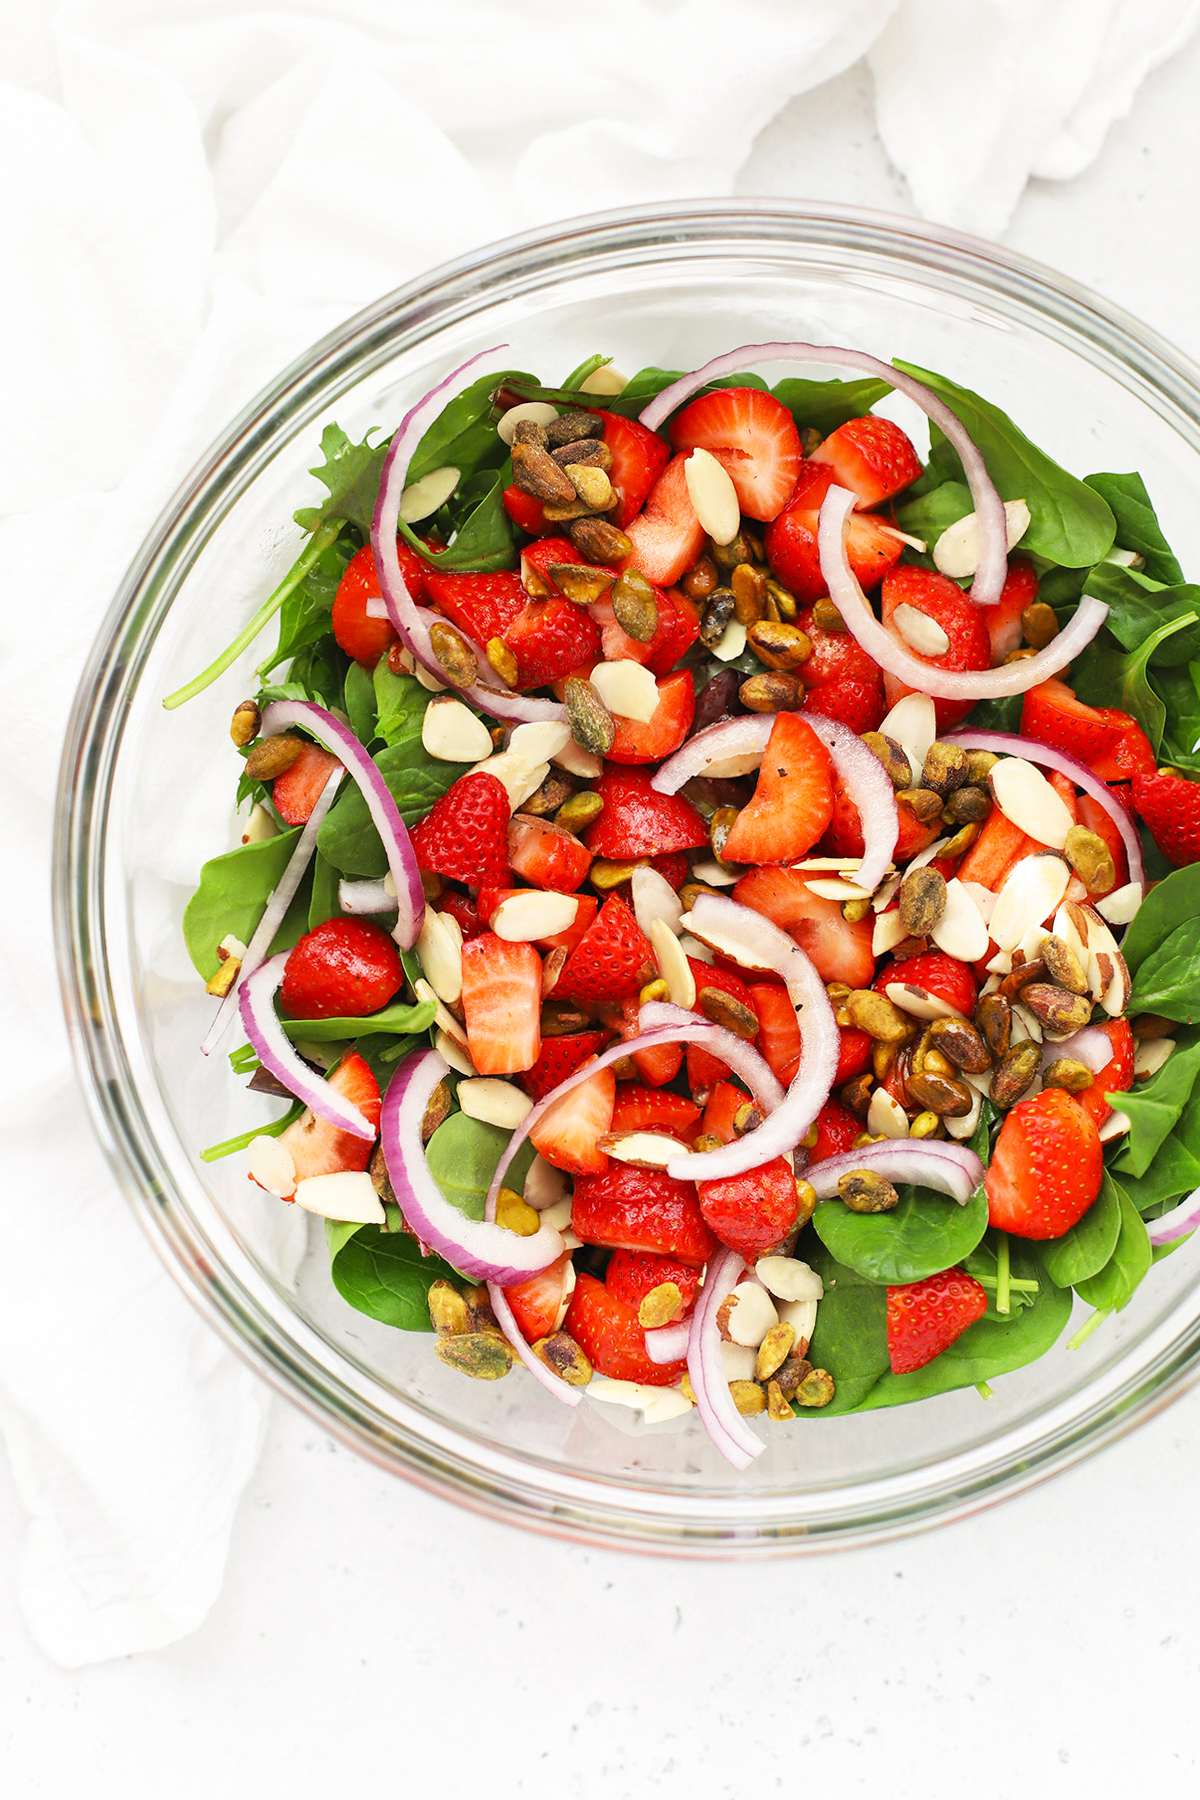 Overhead view of a mixing bowl of strawberry spinach salad ready to be tossed with dressing